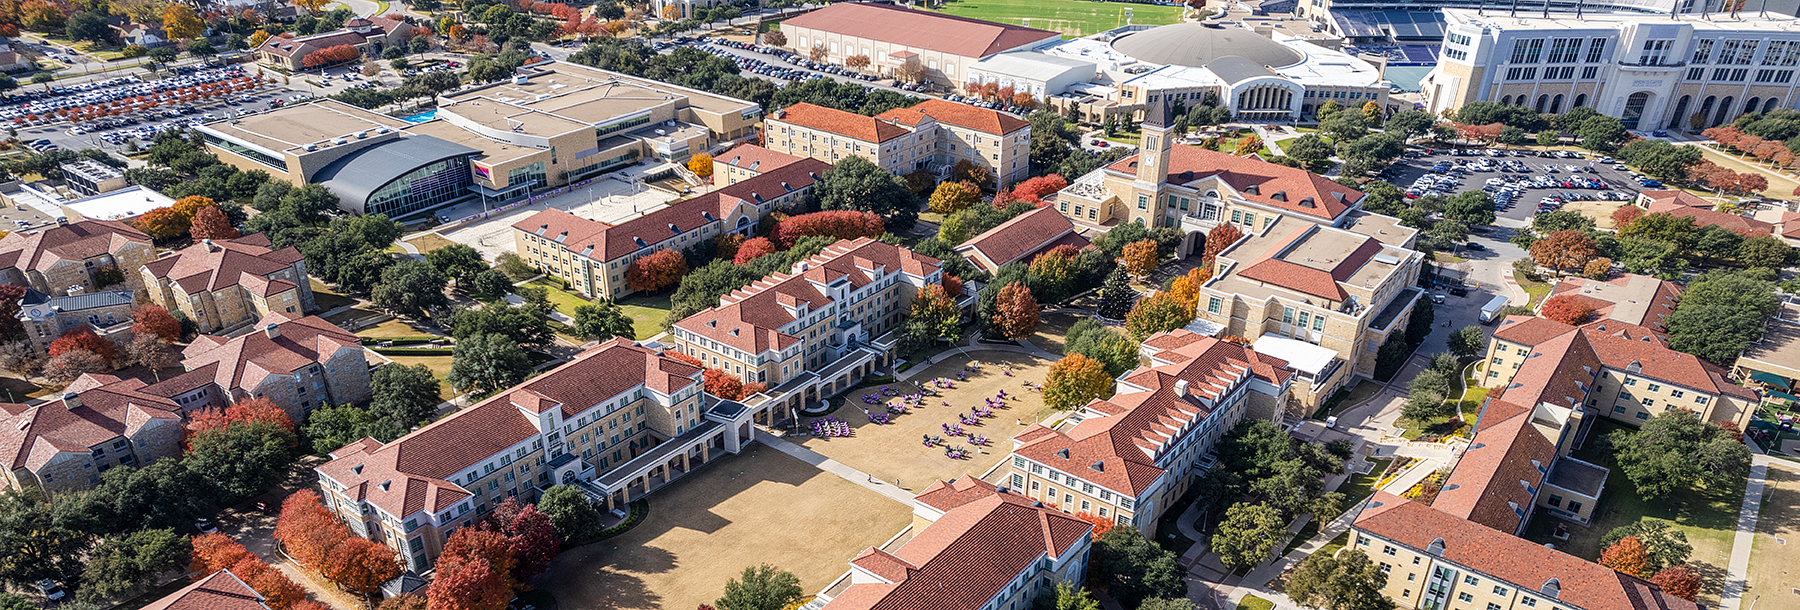 Section Image: Aerial view of TCU 